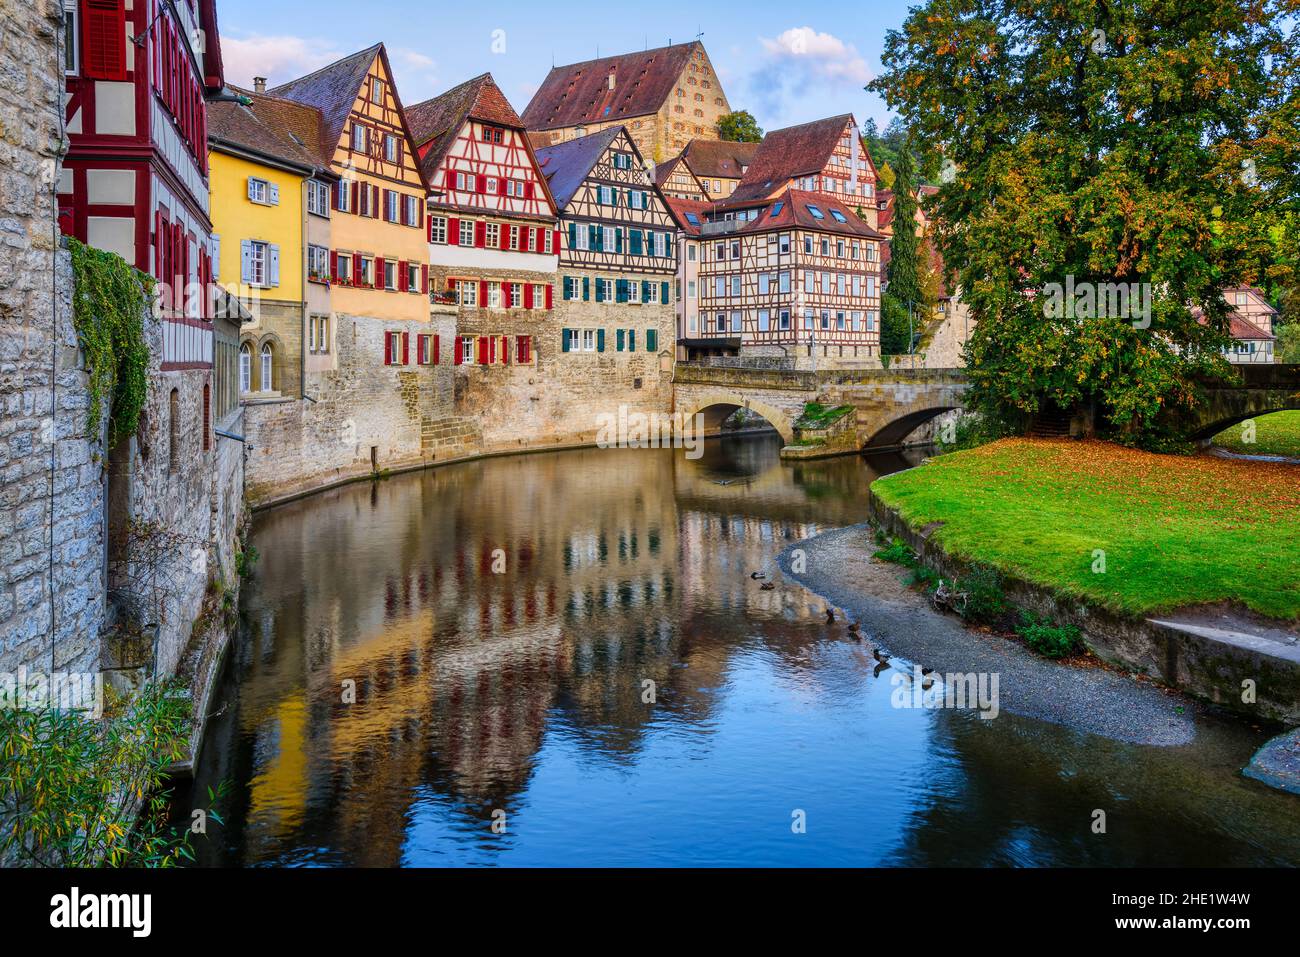 Gothic half-timbered houses reflecting in river in the Schwabisch Hall city Old town, Germany Stock Photo